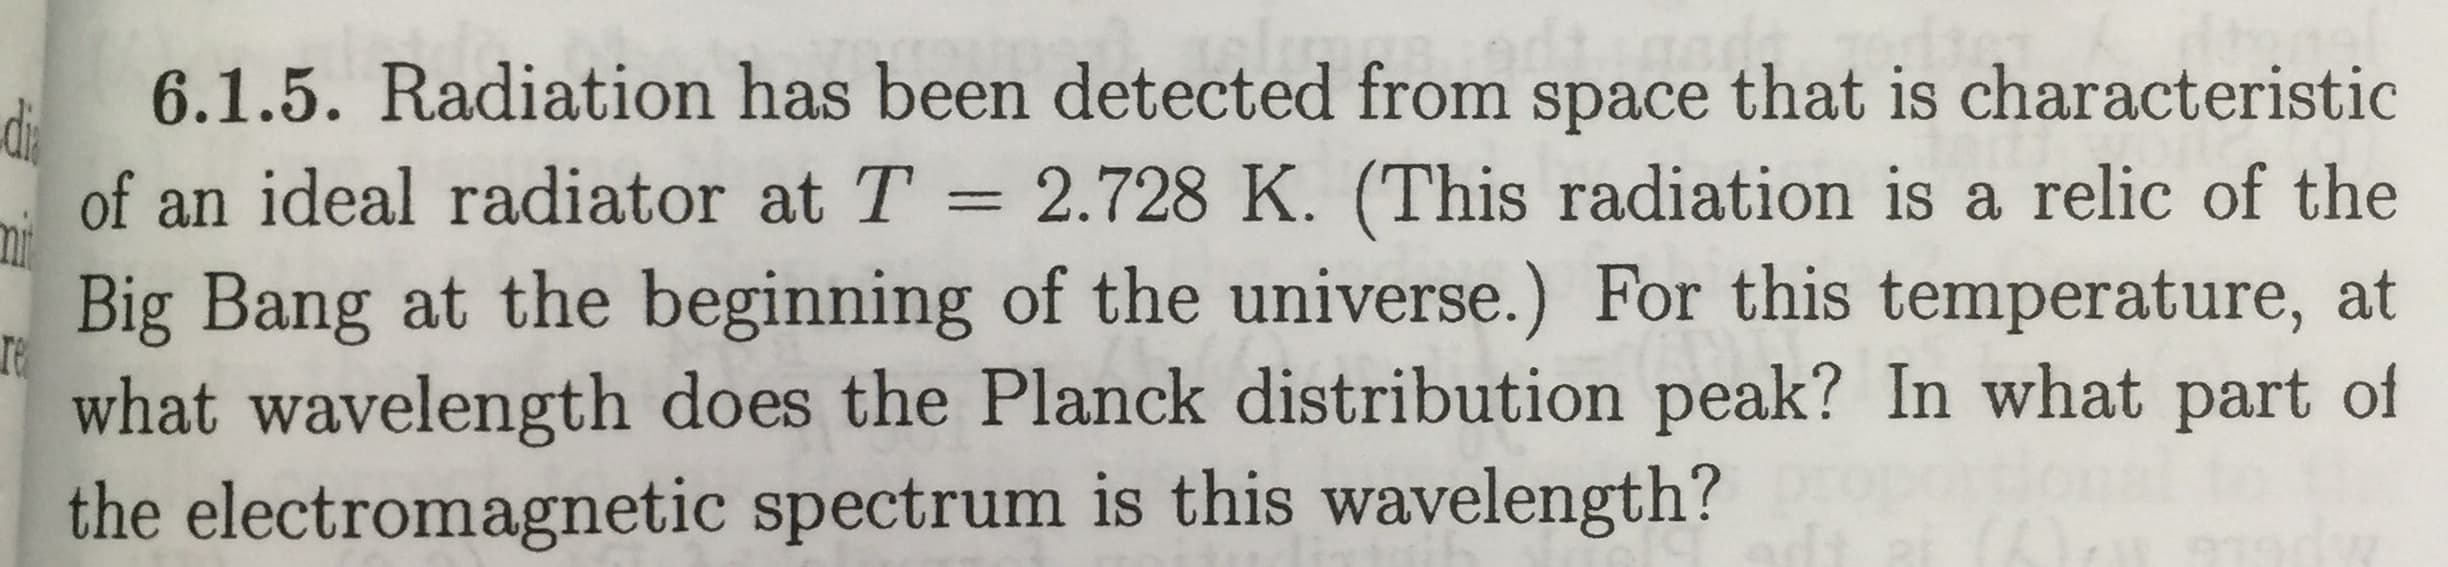 6.1.5. Radiation has been detected from space that is characteristic
of an ideal radiator at T = 2.728 K. (This radiation is a relic of the
Big Bang at the beginning of the universe.) For this temperature, at
what wavelength does the Planck distribution peak? In what part of
the electromagnetic spectrum is this wavelength?
%3D
